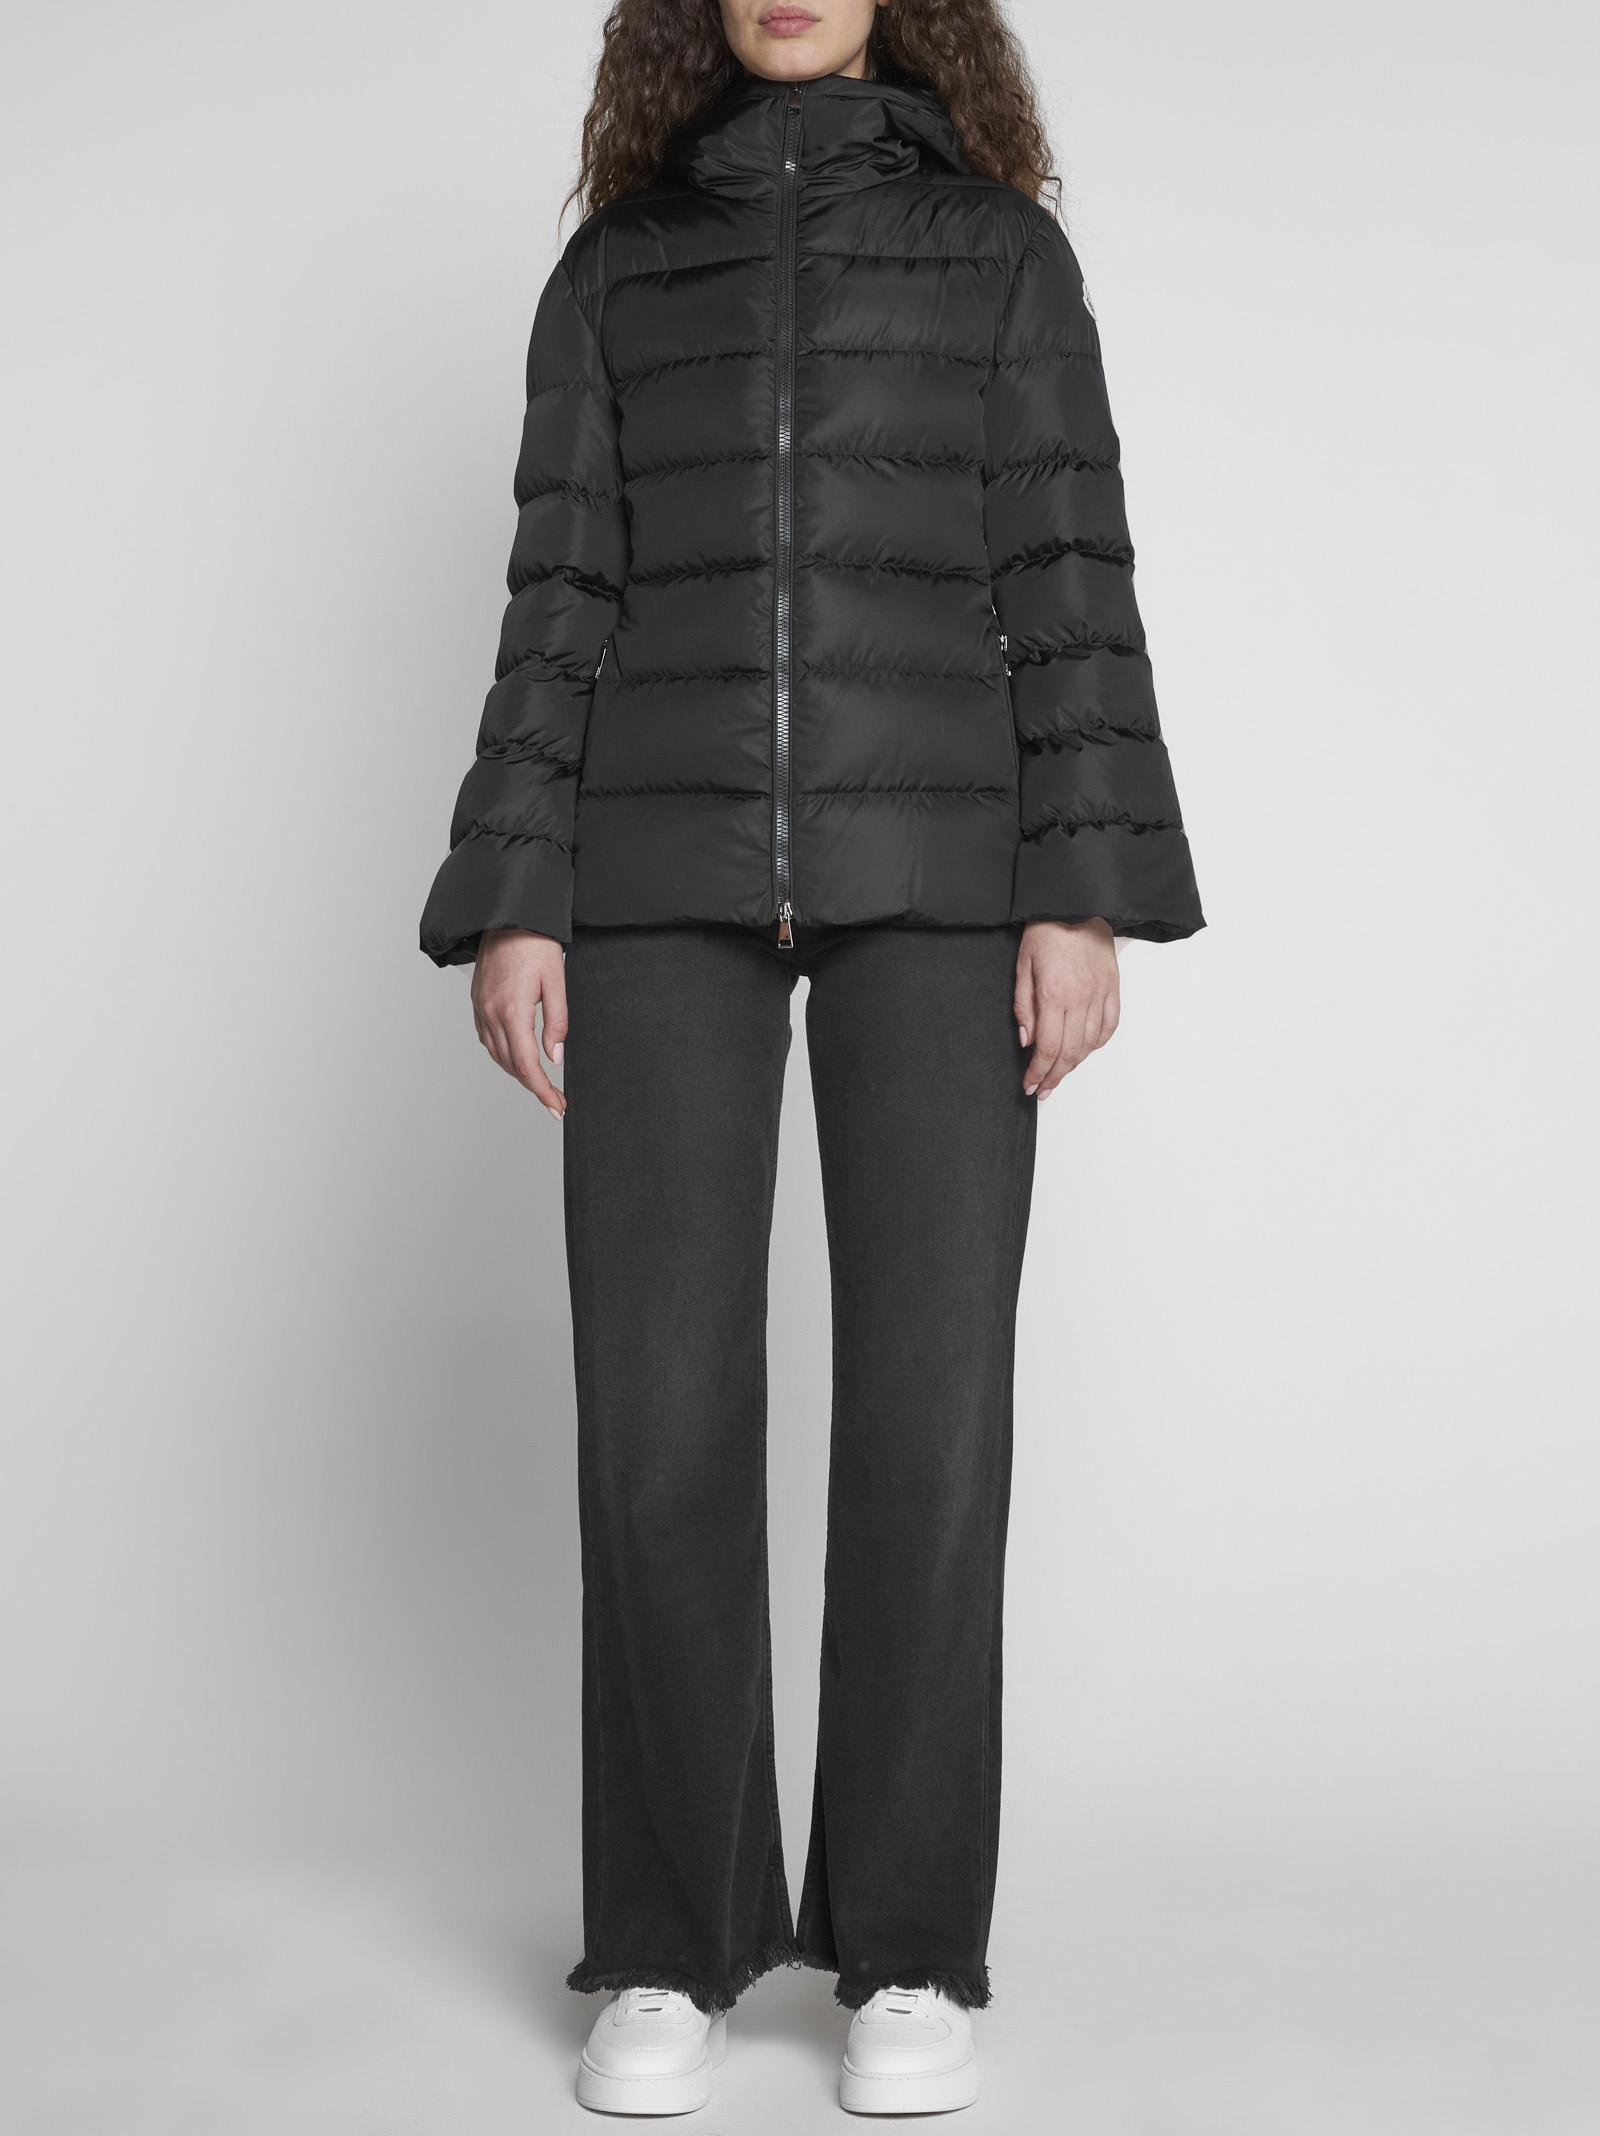 Moncler Dera Quilted Nylon Down Jacket in Black | Lyst